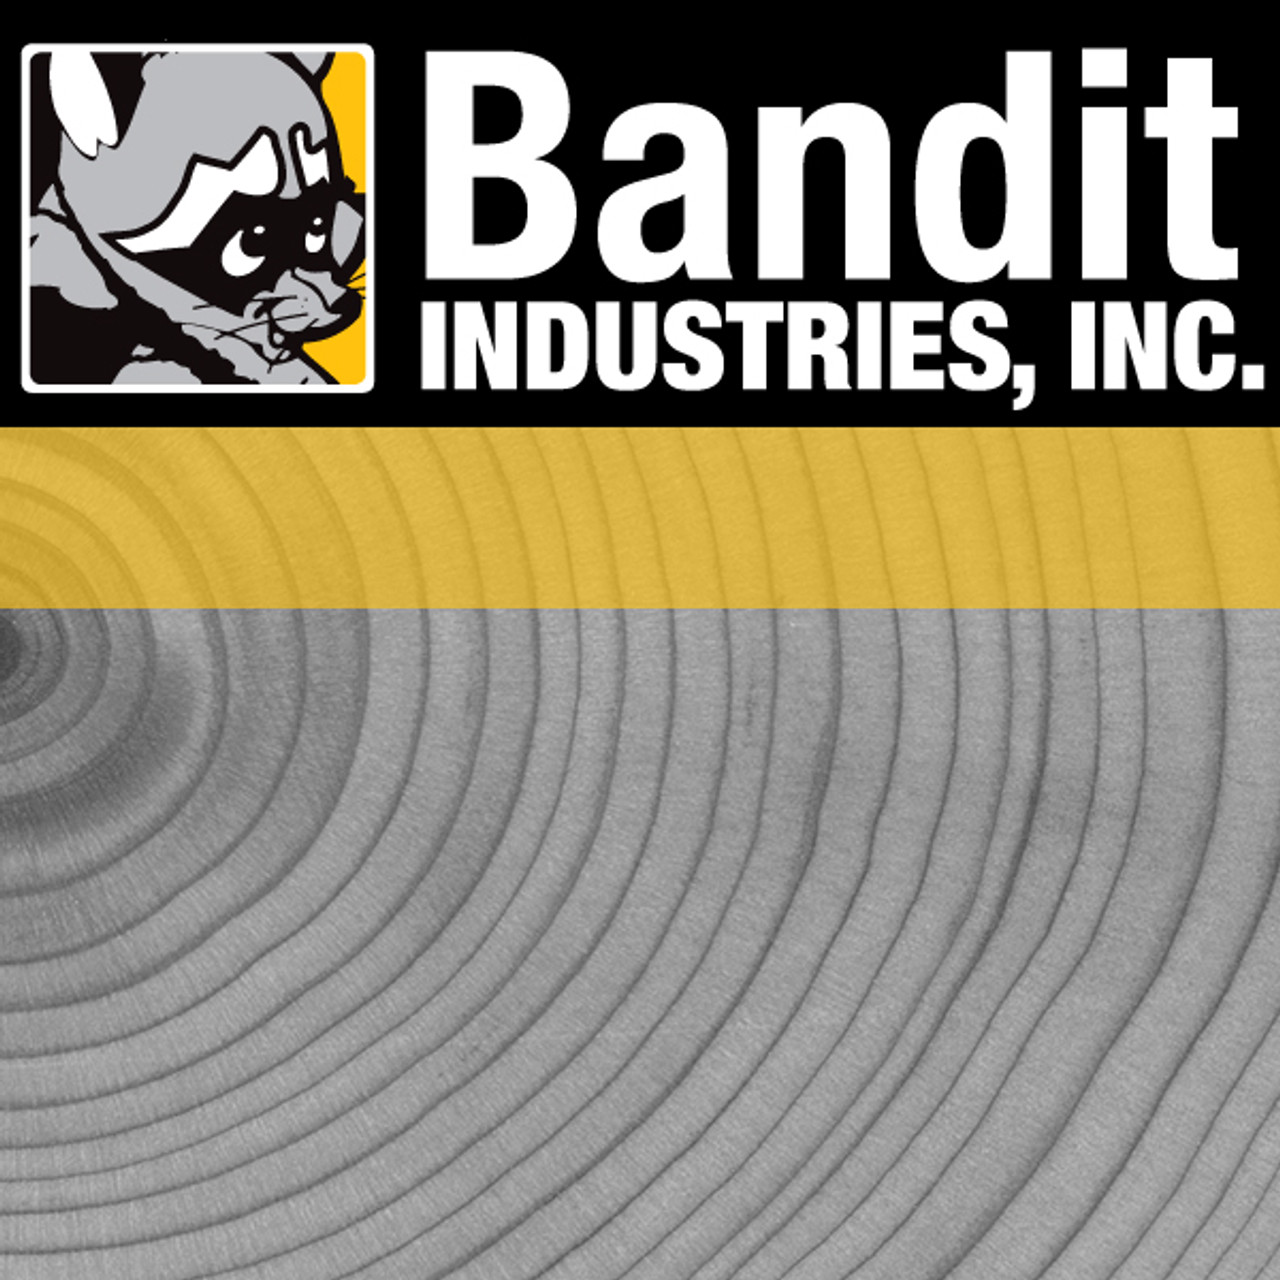 900-8903-62: BANDIT AVOID INJURY OR DEATH DECAL